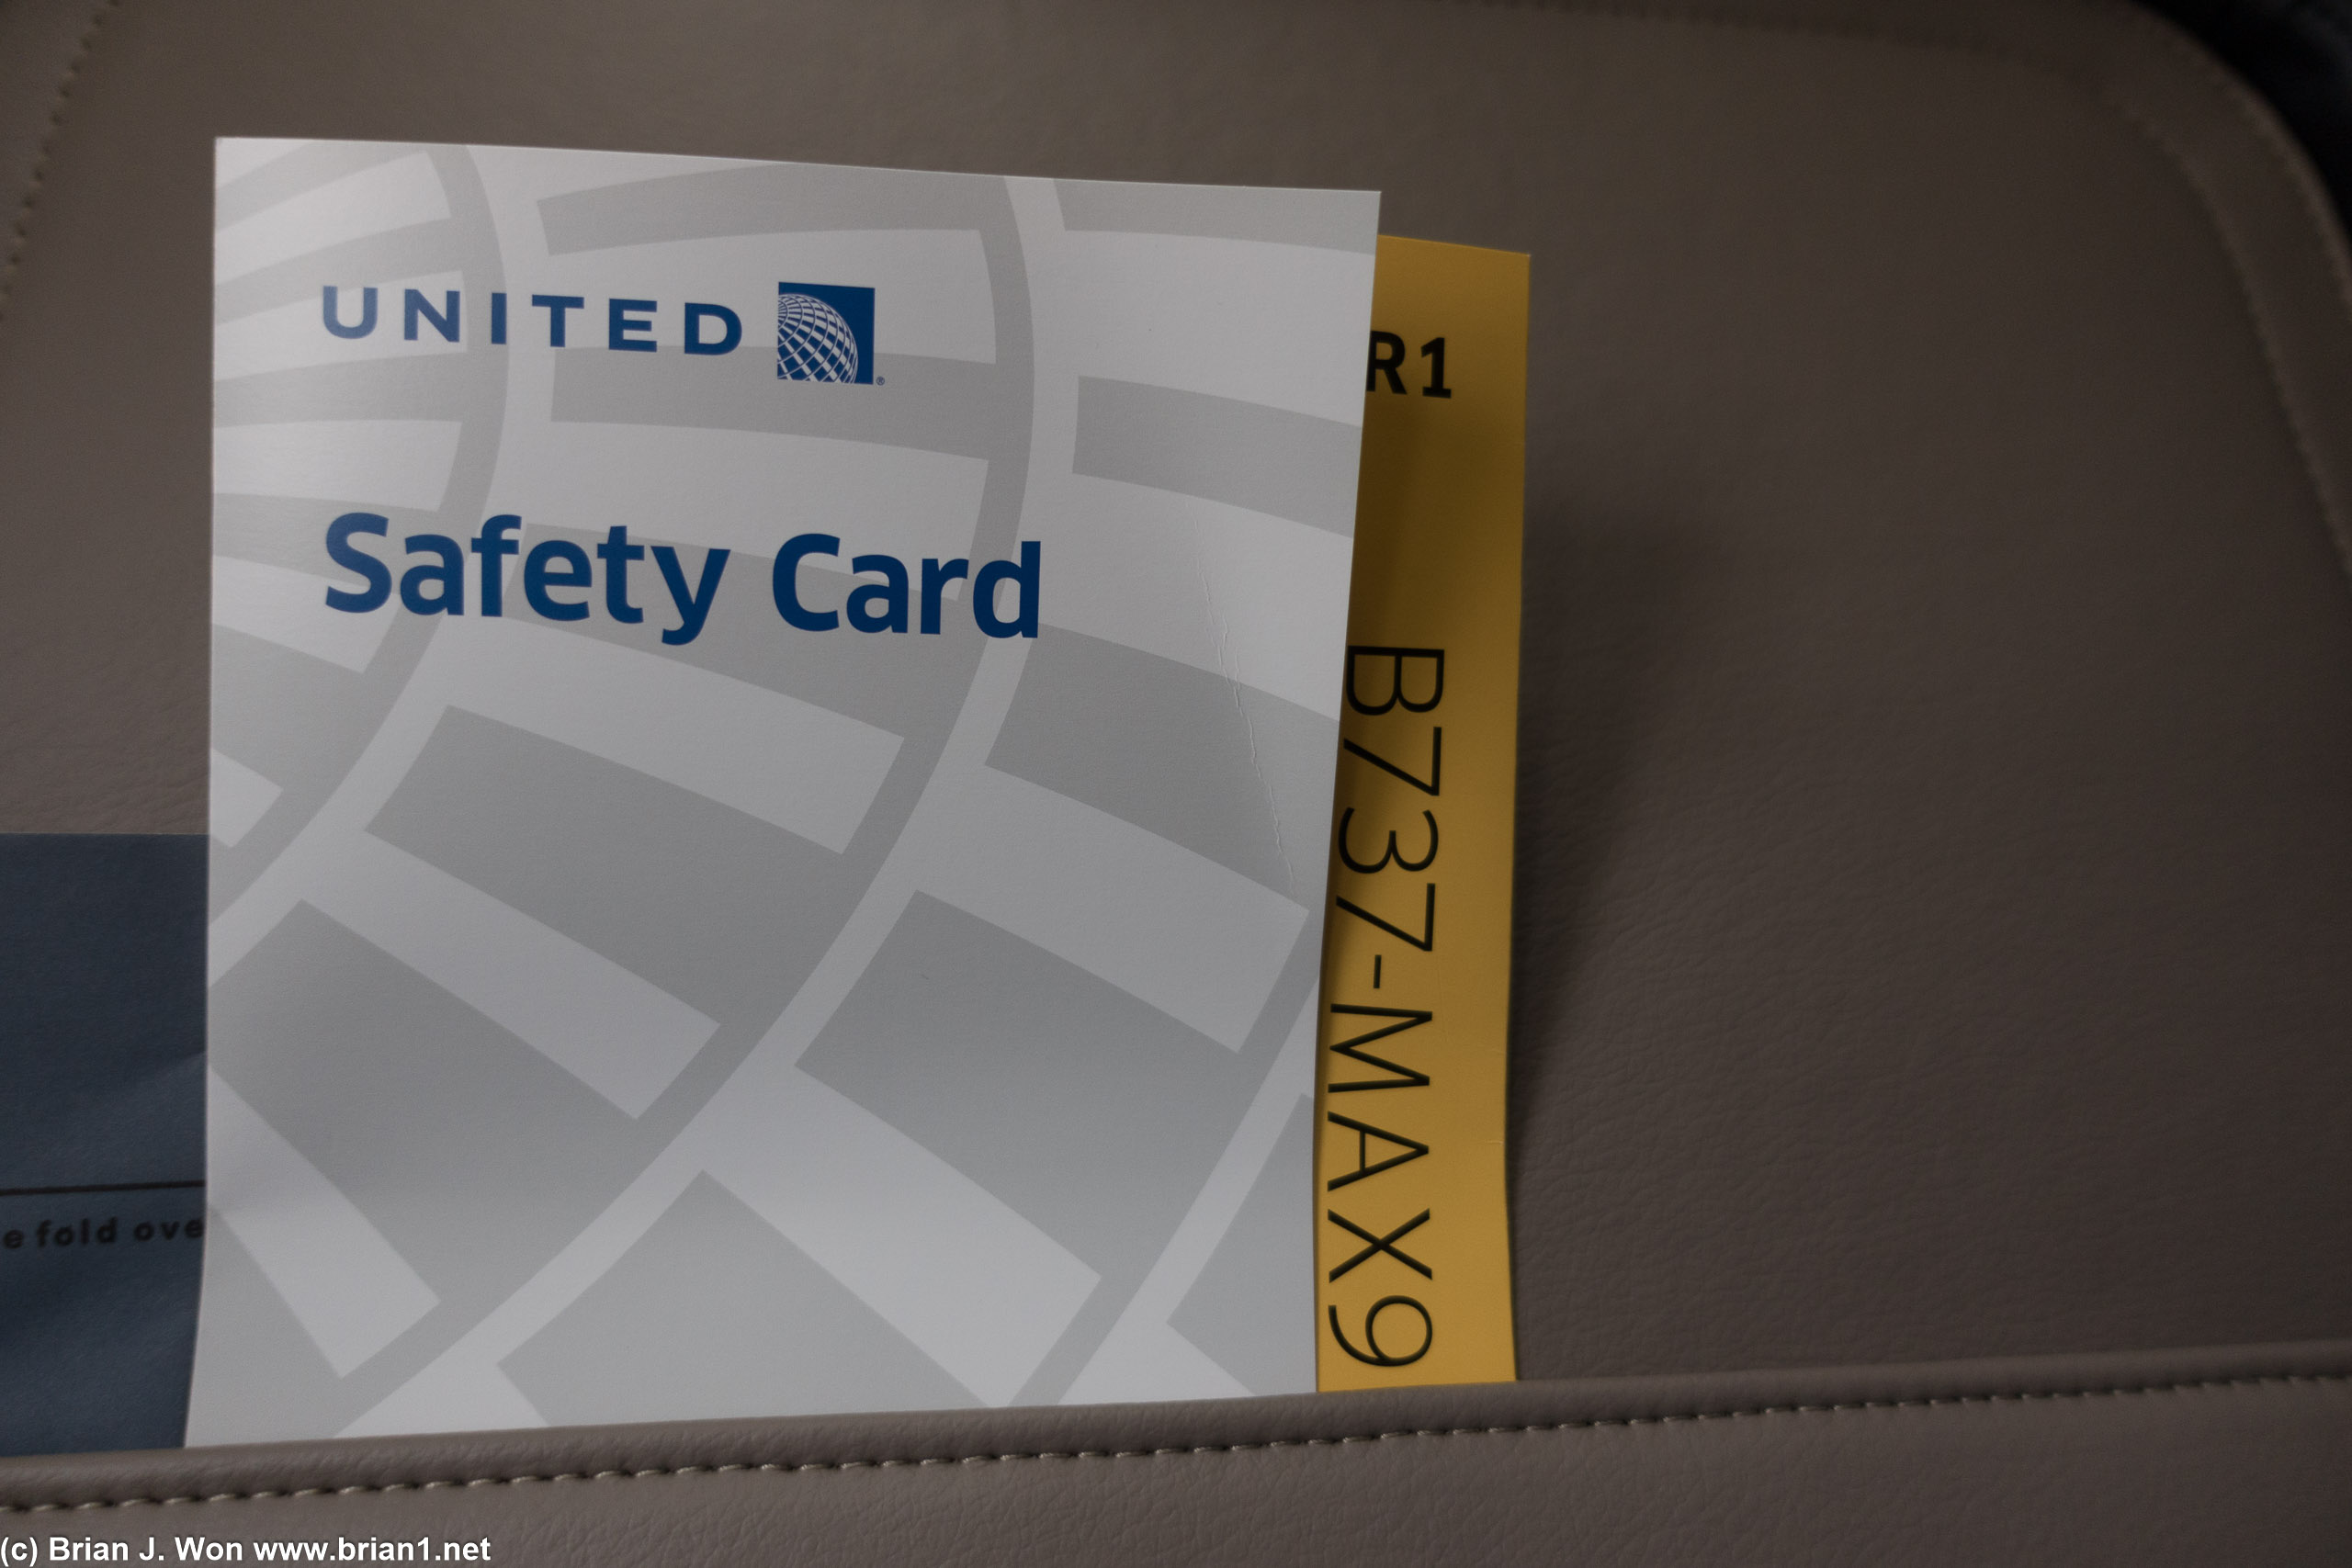 Kind of surprised they still advertise it's the 737 MAX on the safety cards.